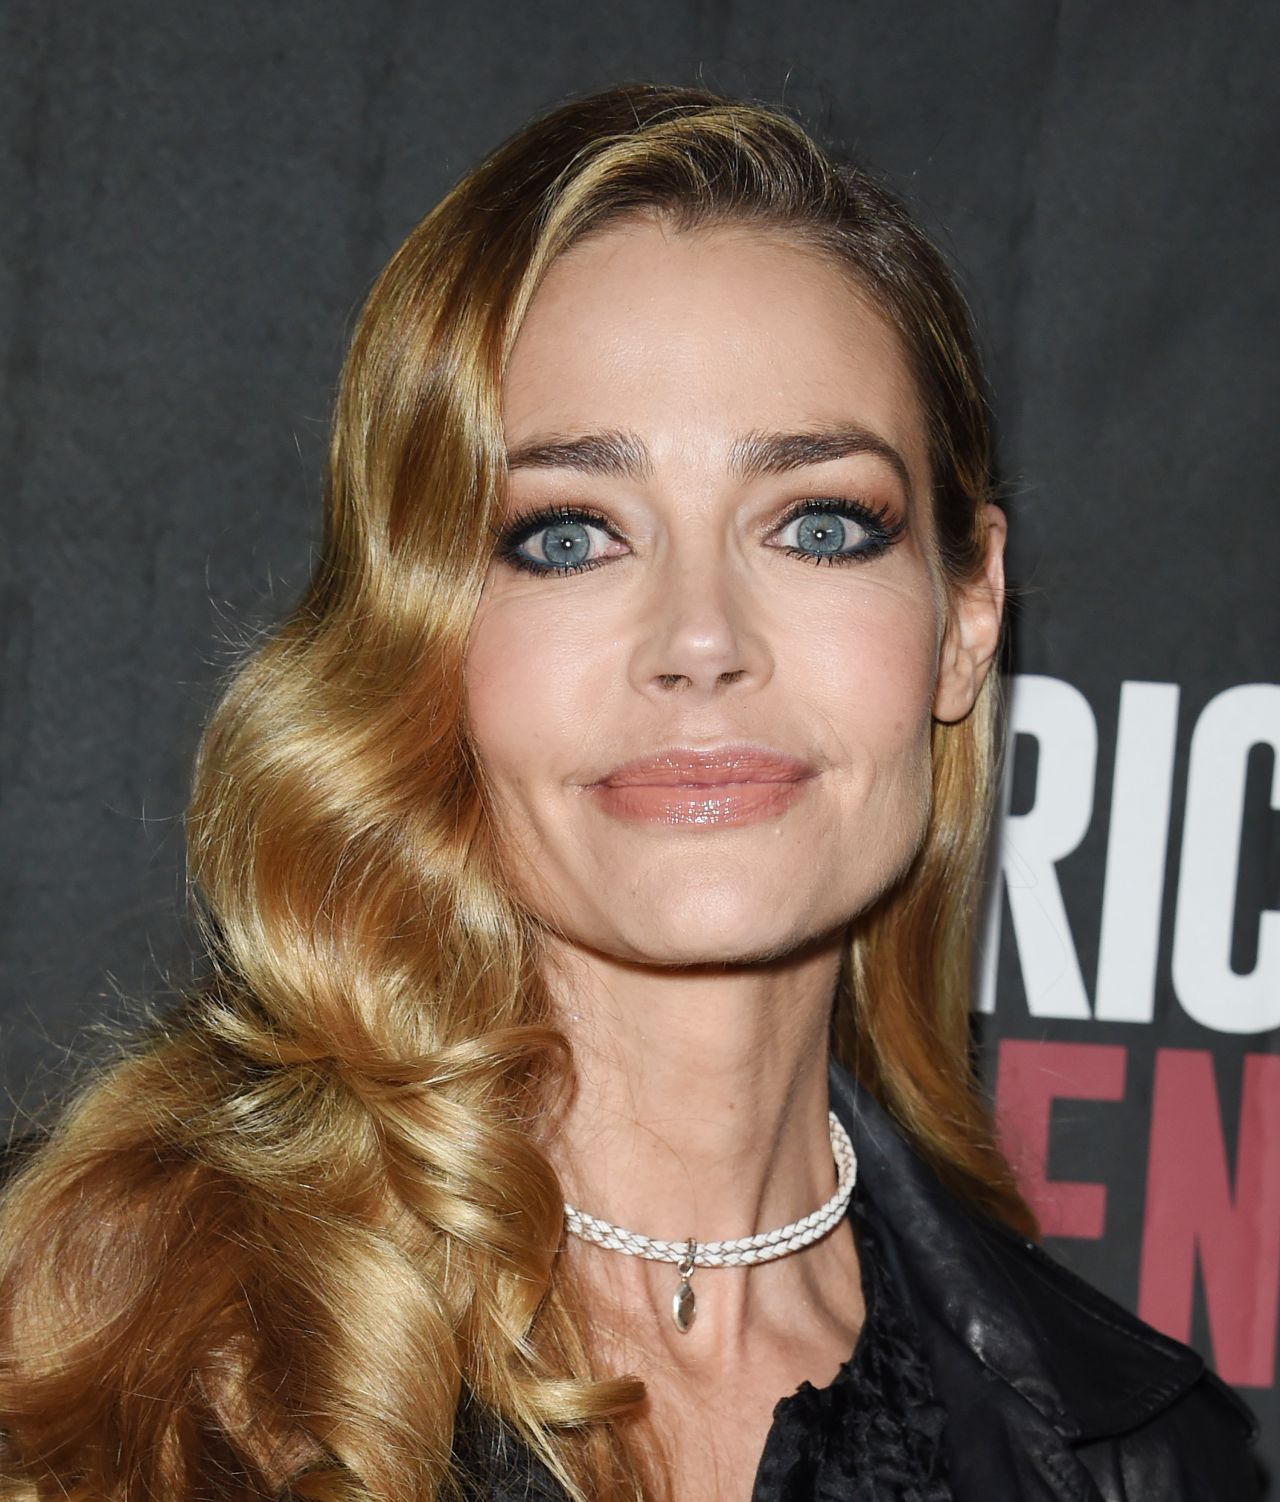 Denise Richards - 'American Violence' Premiere in Hollywood 1/25/ 2017